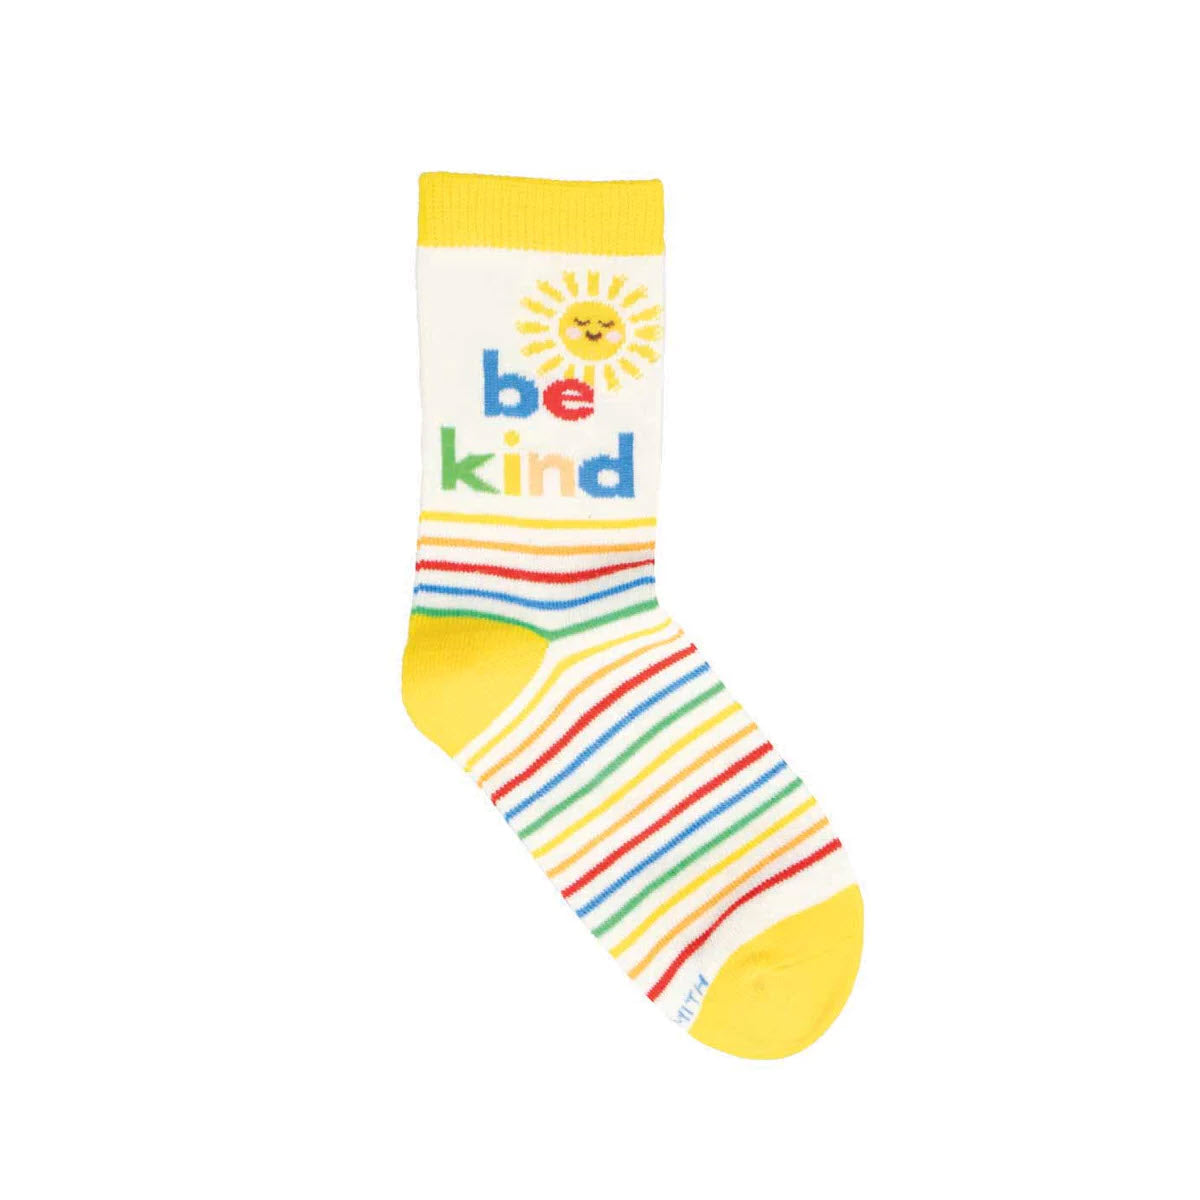 A colorful striped kids sock with &quot;be kind&quot; text and a sun design on a white background, suitable for shoe size 10-1 youth. Check out the Socksmith Be Kind Crew Socks Ivory - Kids.